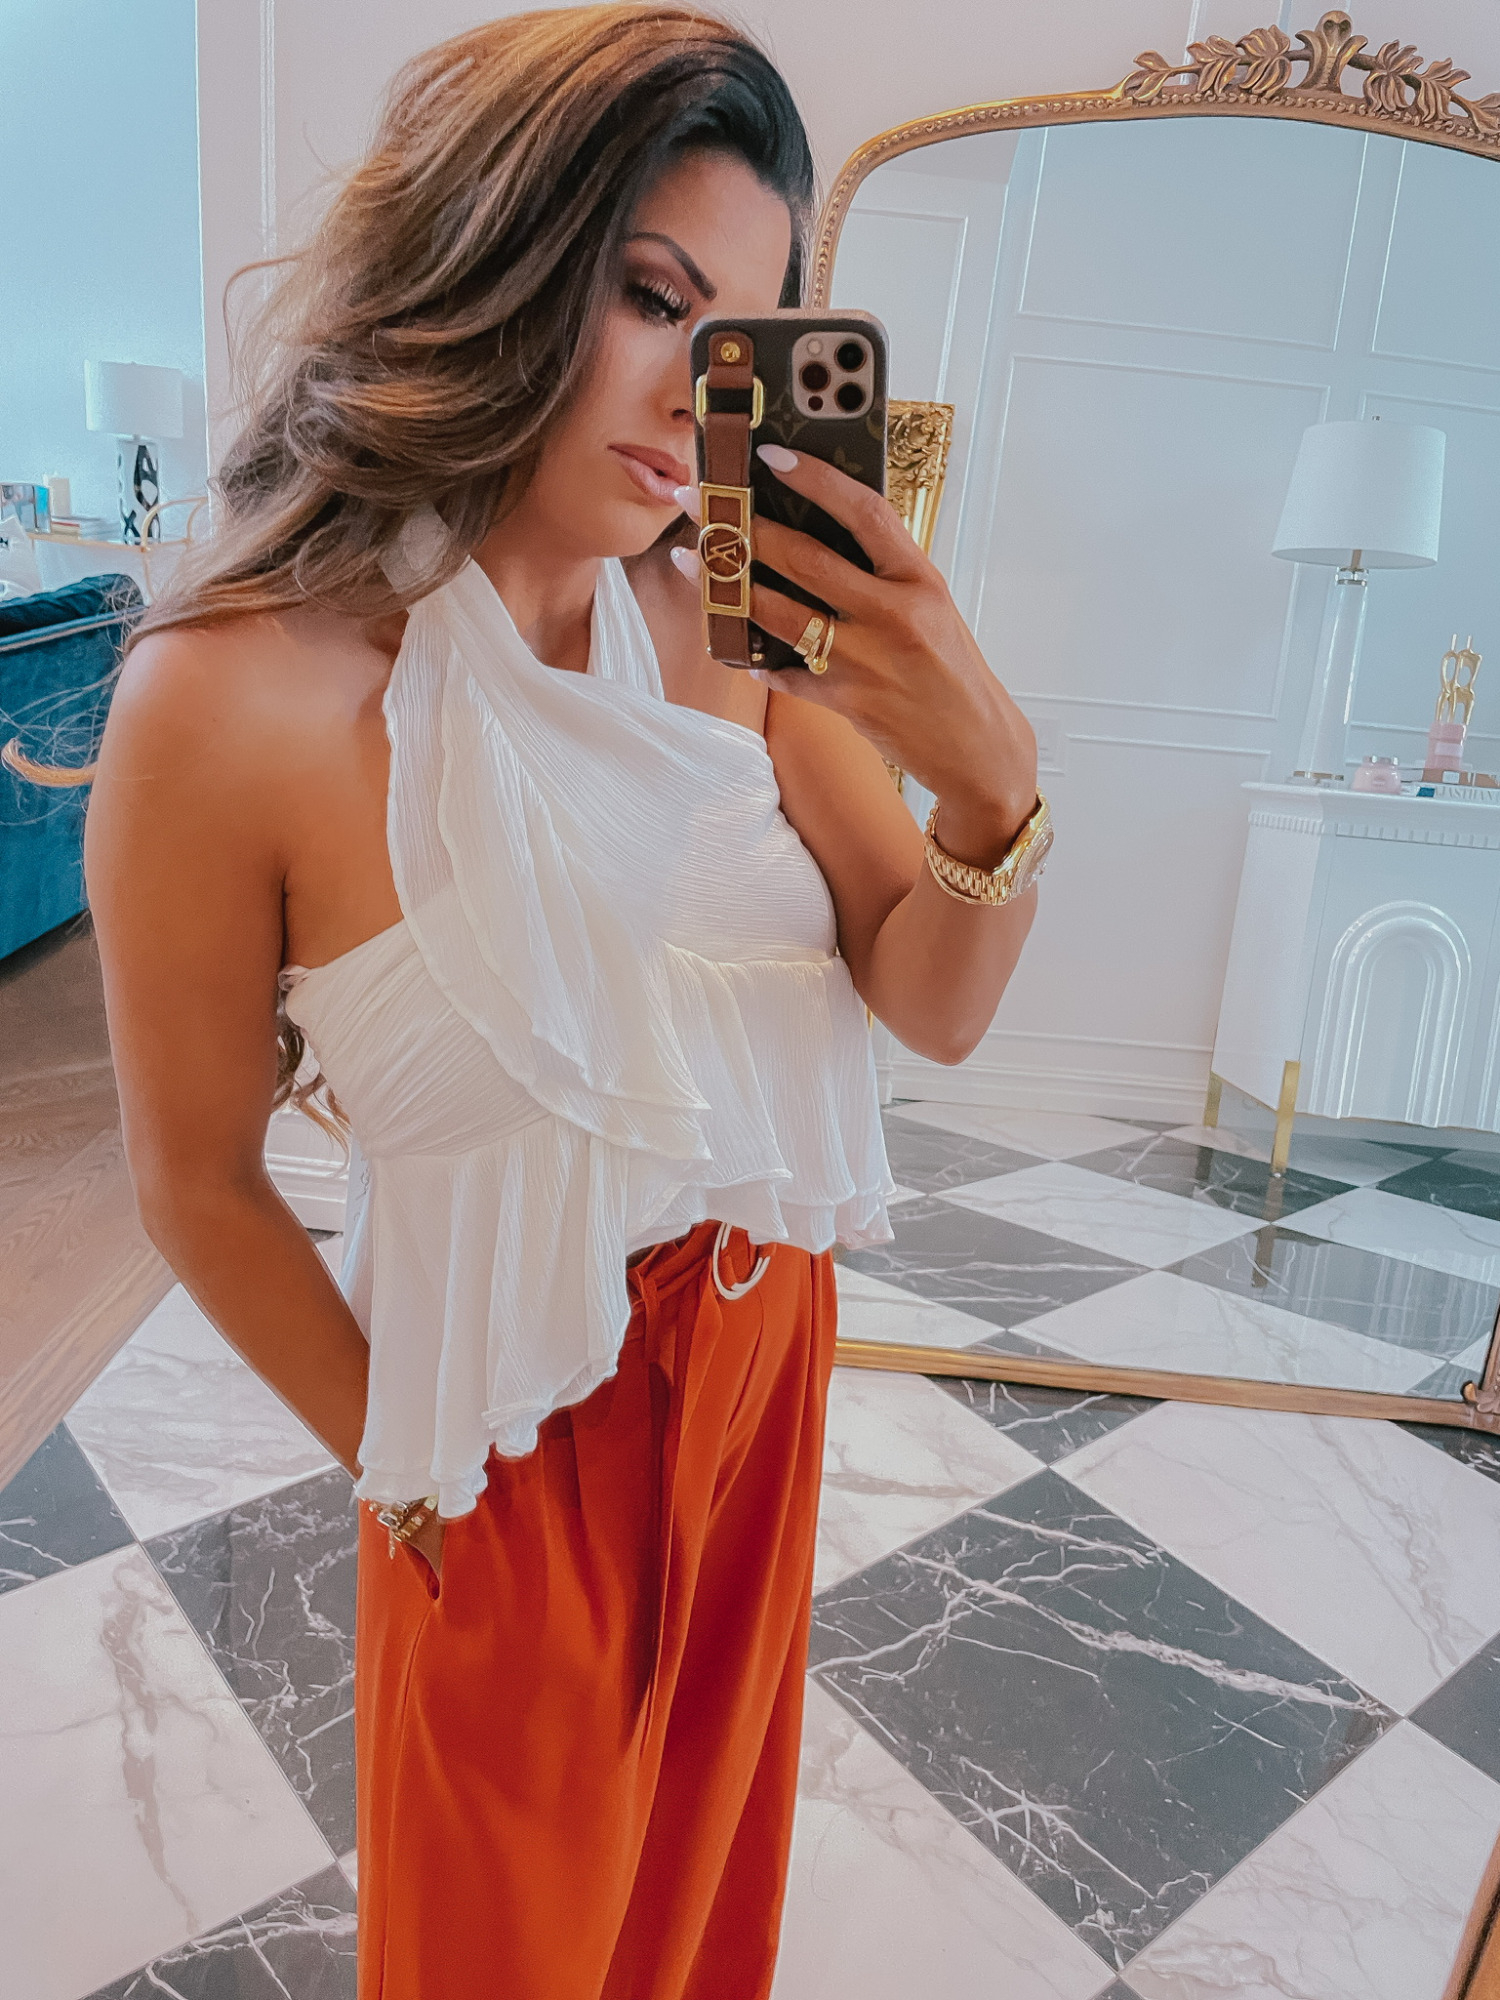 summer outfit ideas, white top, high waisted pants, red dress boutique try on haul, Emily Ann gemma | Instagram Recap by popular US life and style blog, The Sweetest Thing: image of Emily Gemma wearing a white ruffle halter top with orange high waist wide leg pants and gold jewelry. 